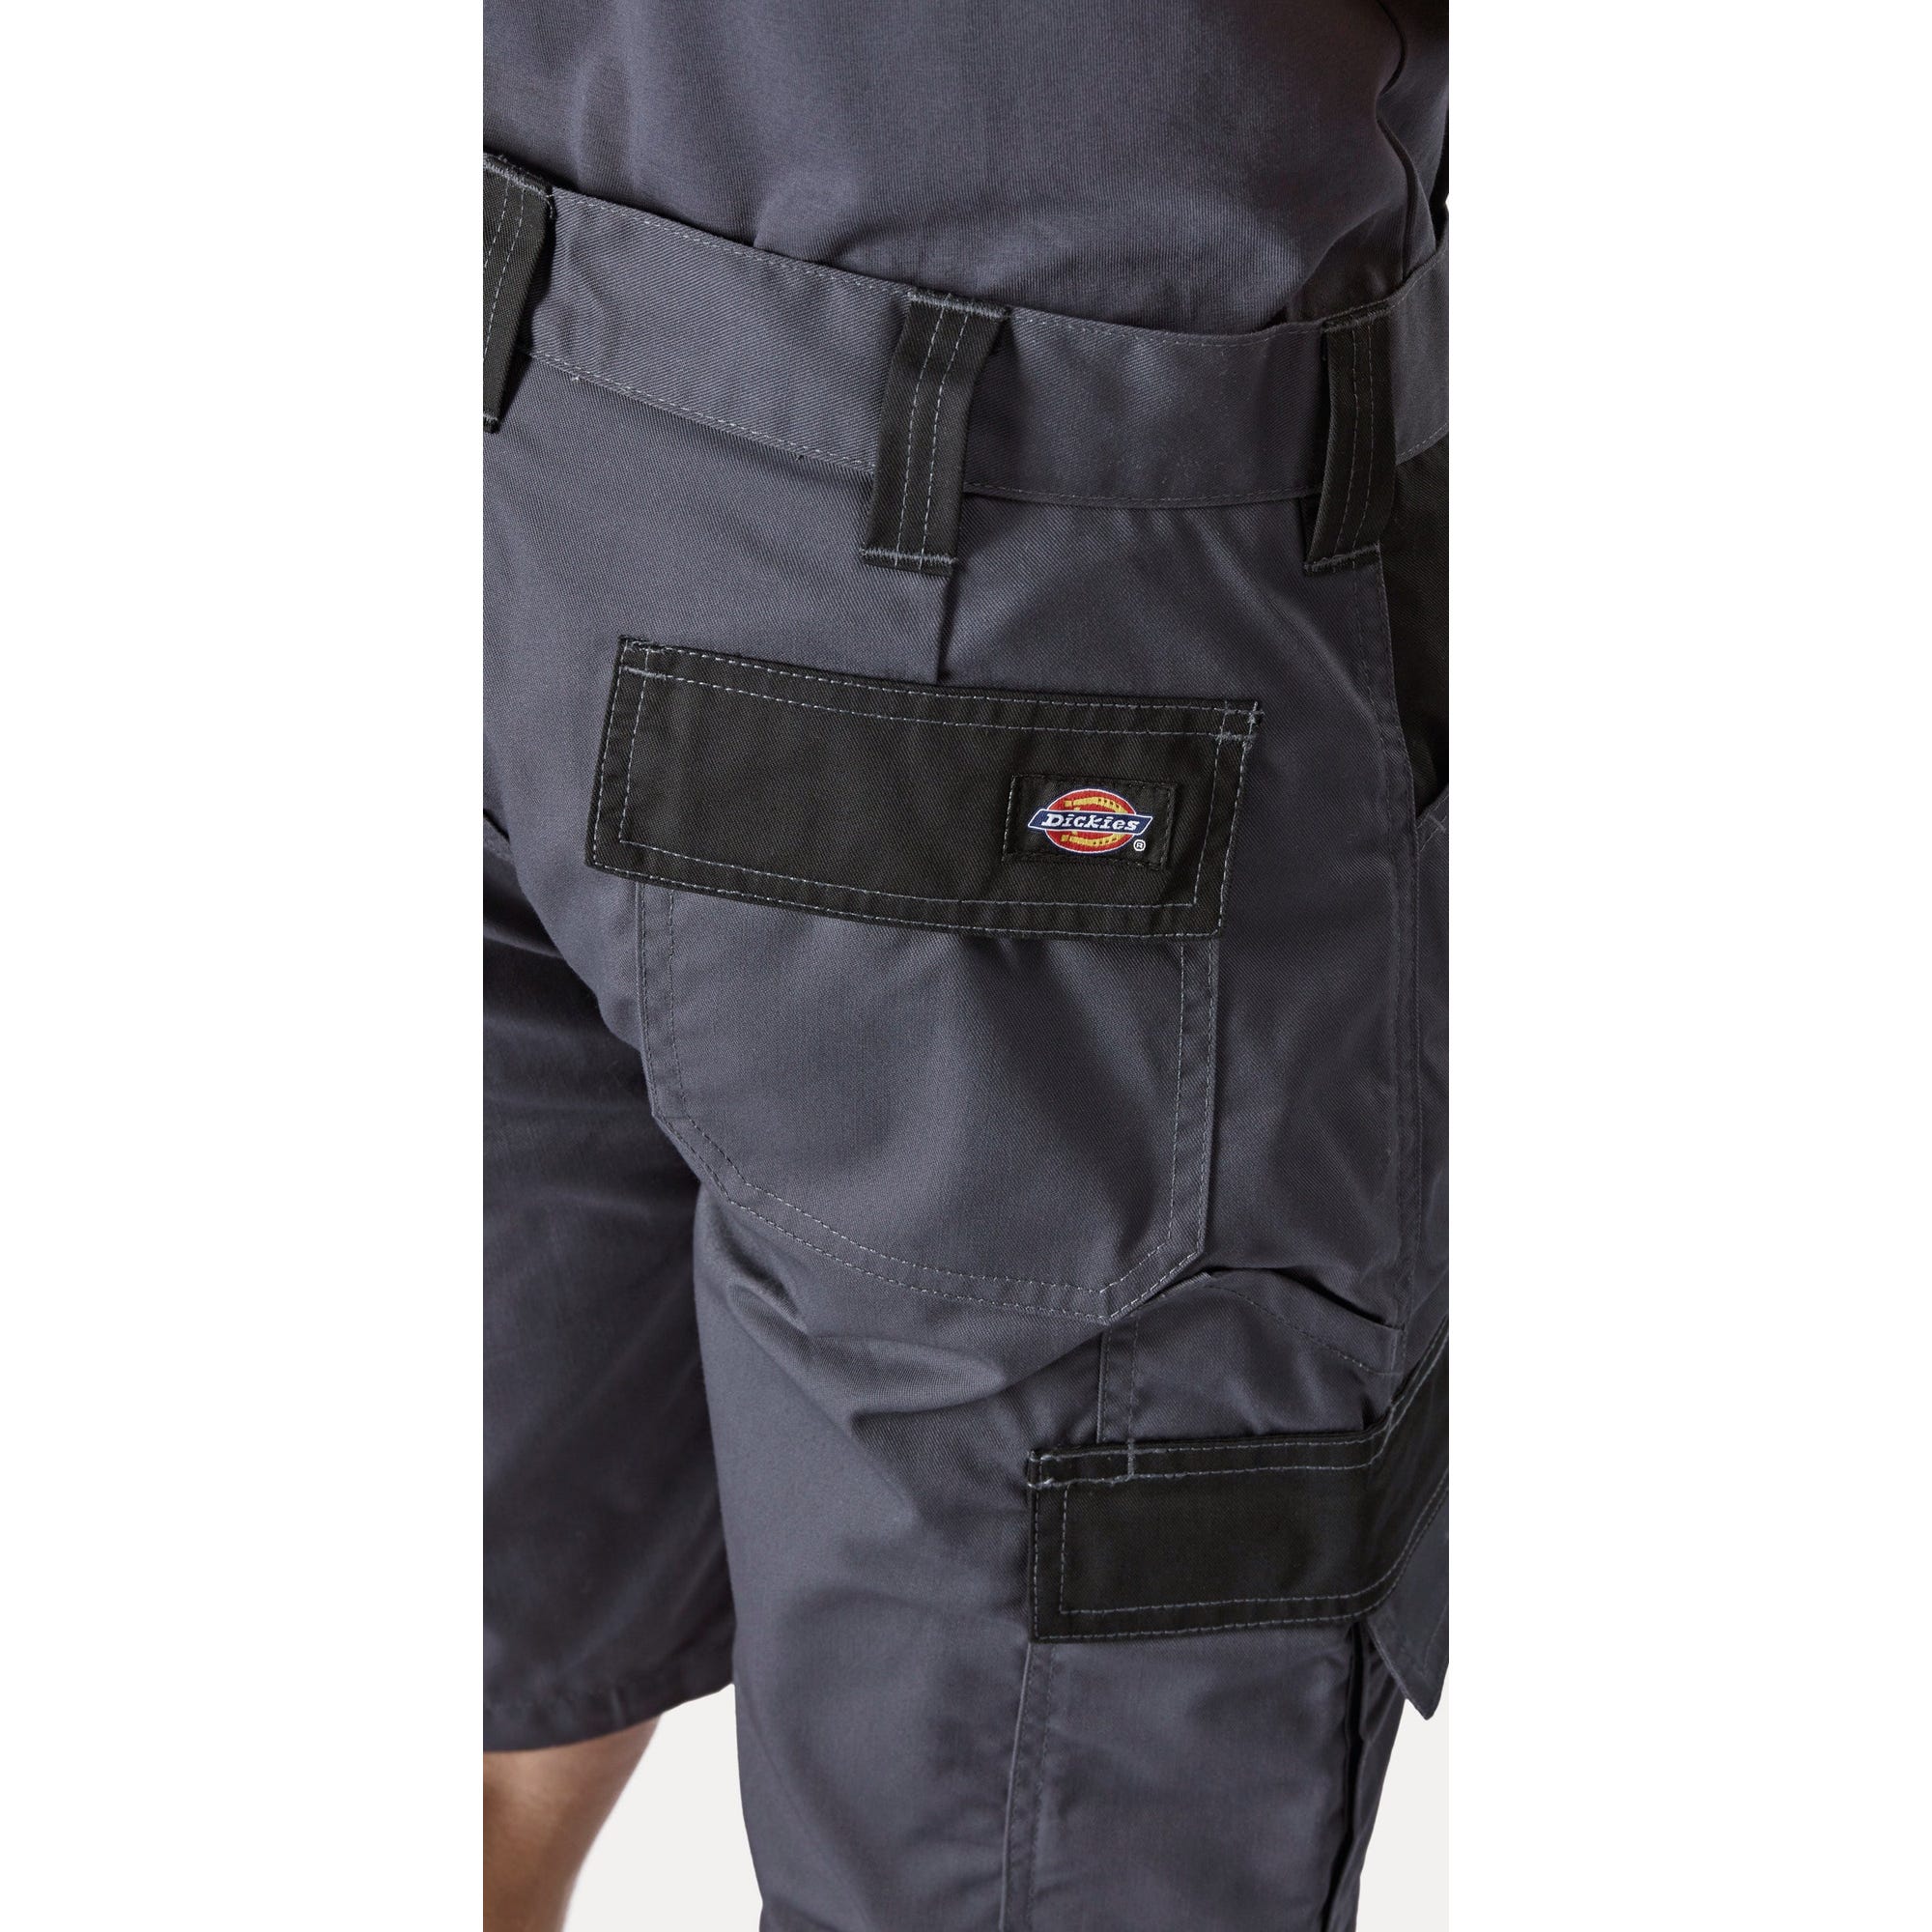 Short Everyday Noir - Dickies - Taille 38 8